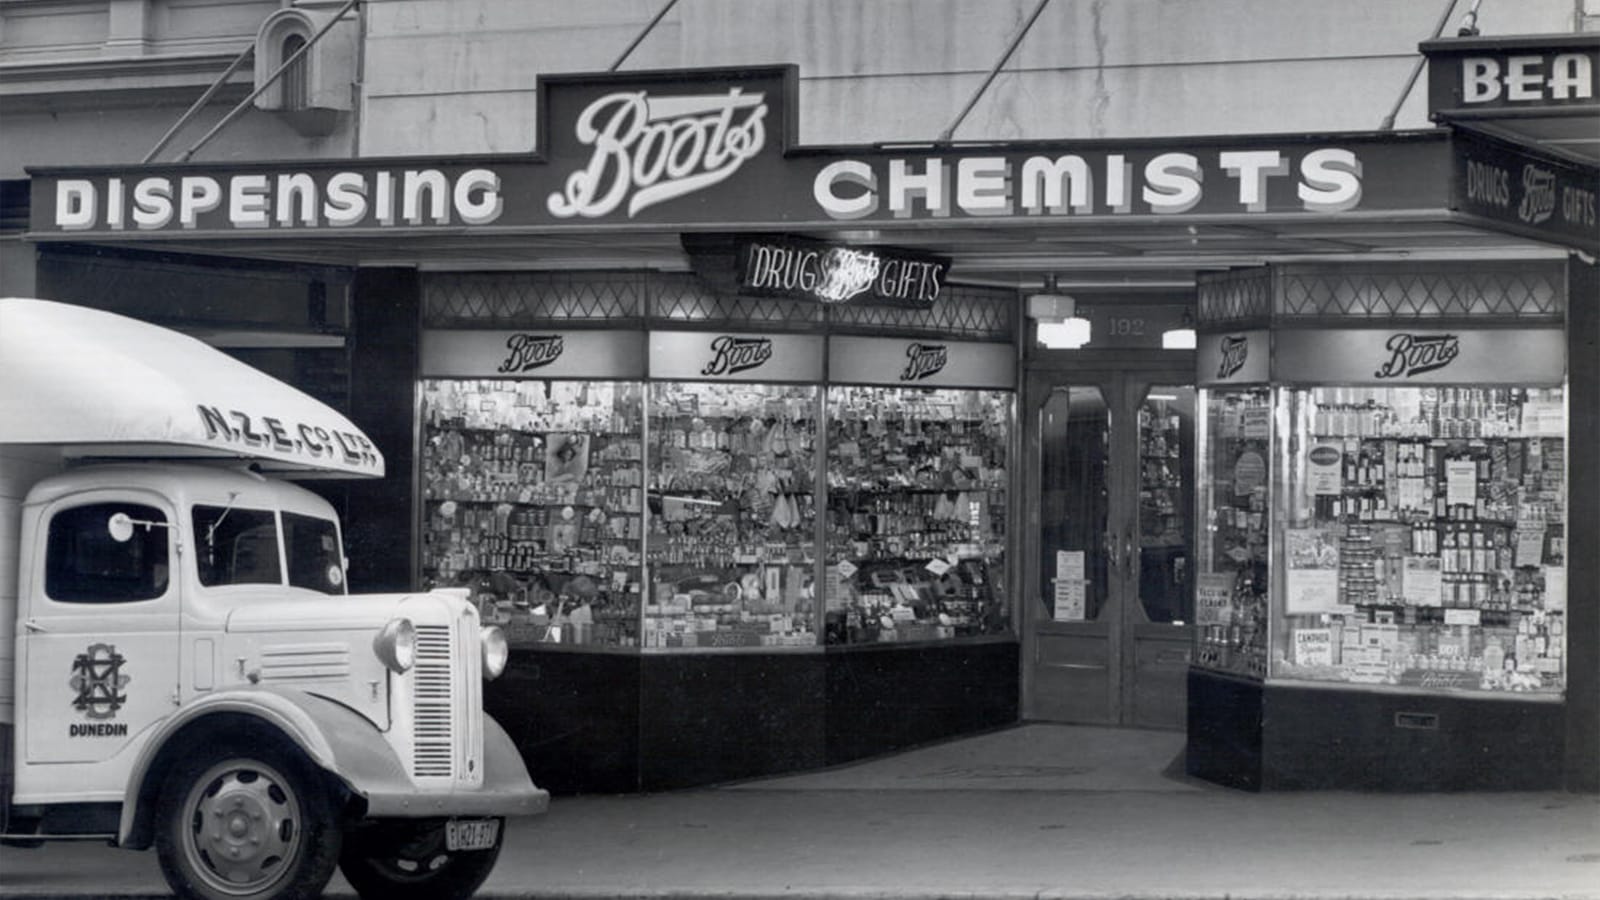 A black and white photo of a Boots chemist store in New Zealand